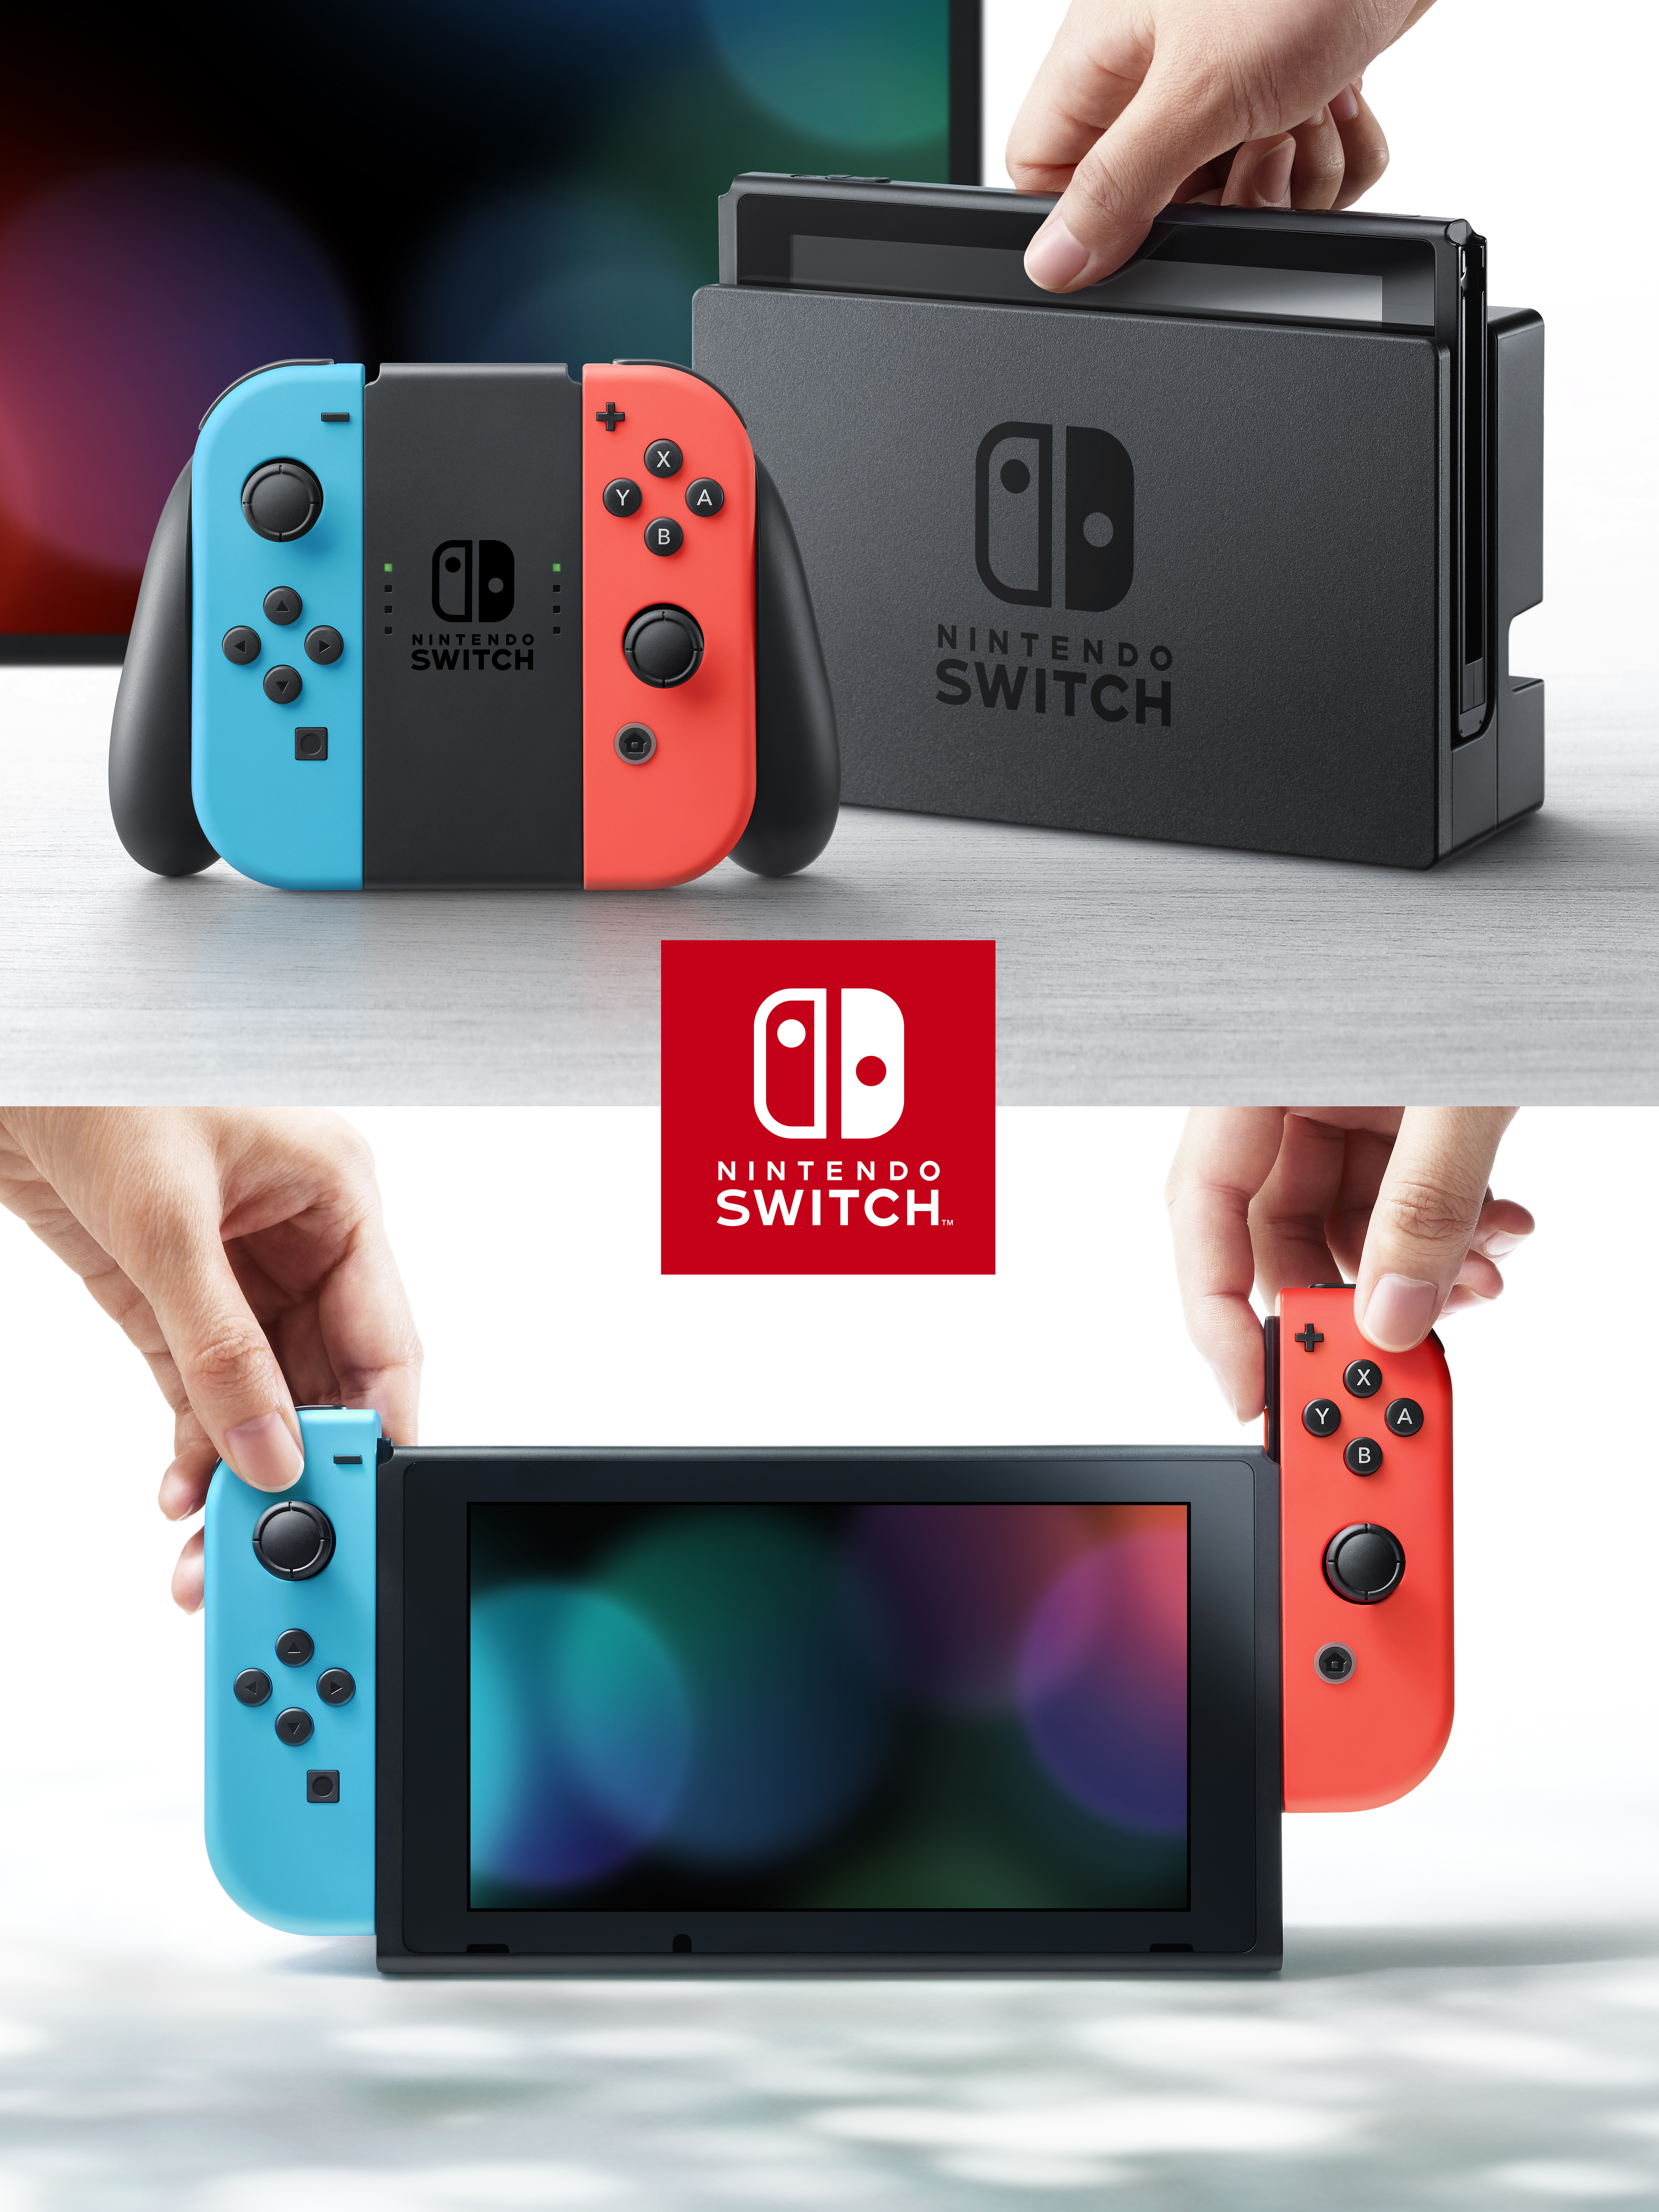 top selling games on nintendo switch